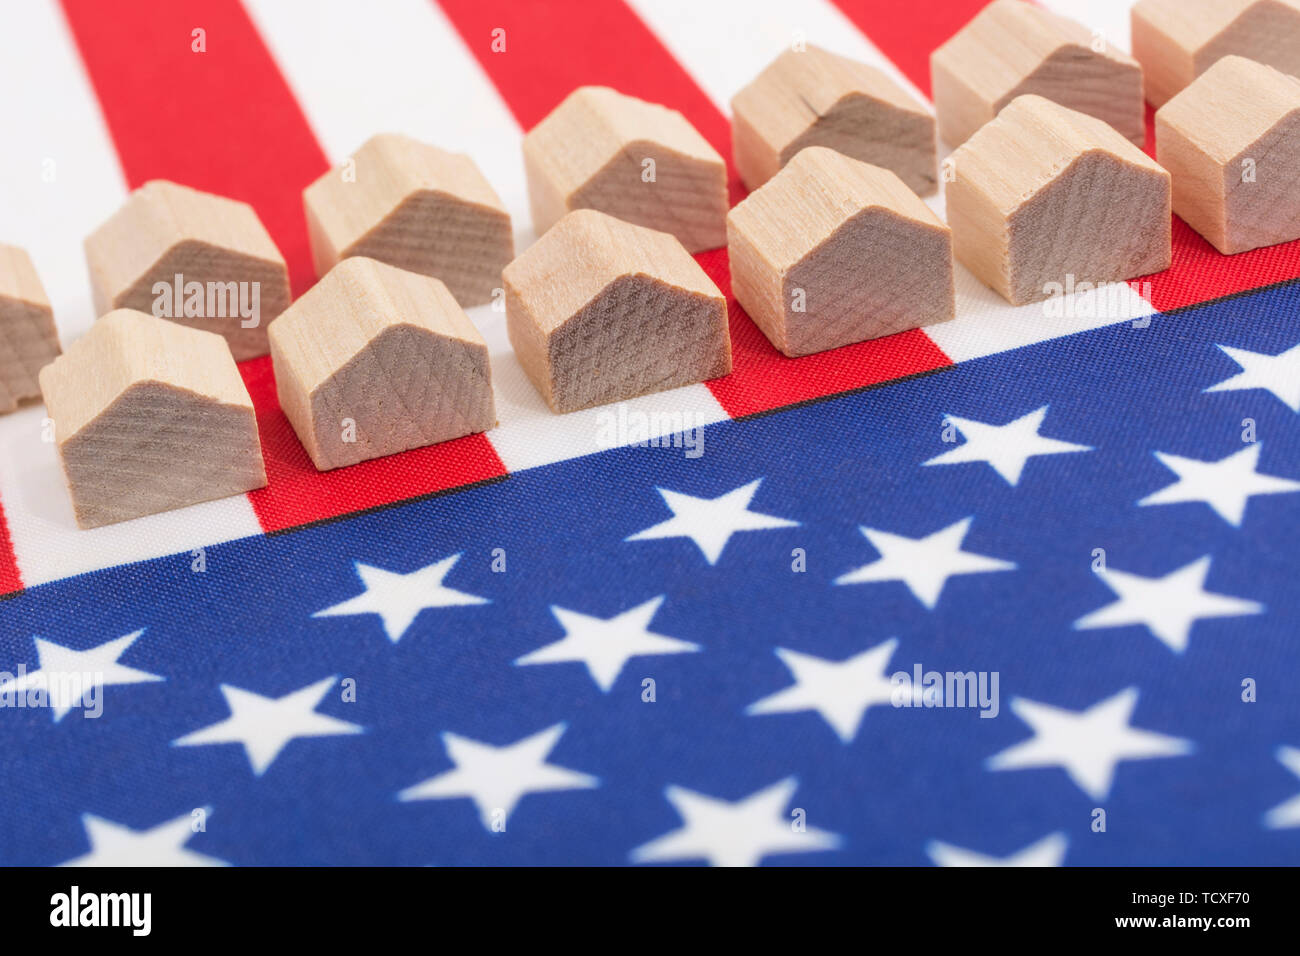 U.S. Stars & Stripes + toy houses. Metaphor US America real estate realty business, getting on property ladder, US construction industry, US subprimes Stock Photo